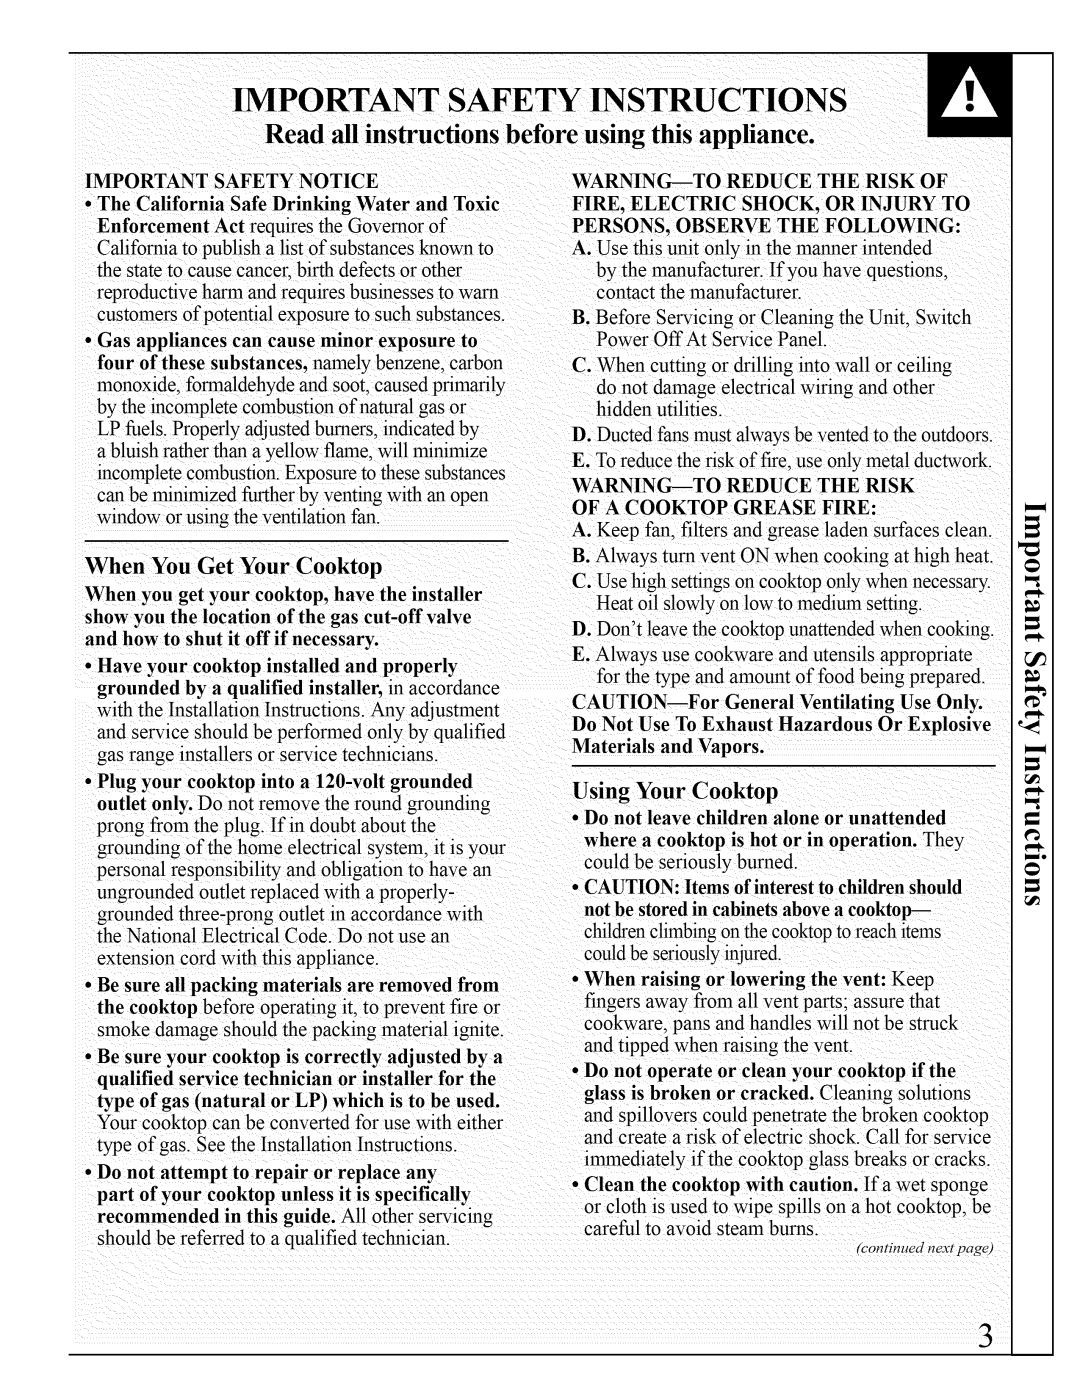 Bosch Appliances JGP640, JGP641 installation instructions Important Safety Instructions, Using Your Cooktop 